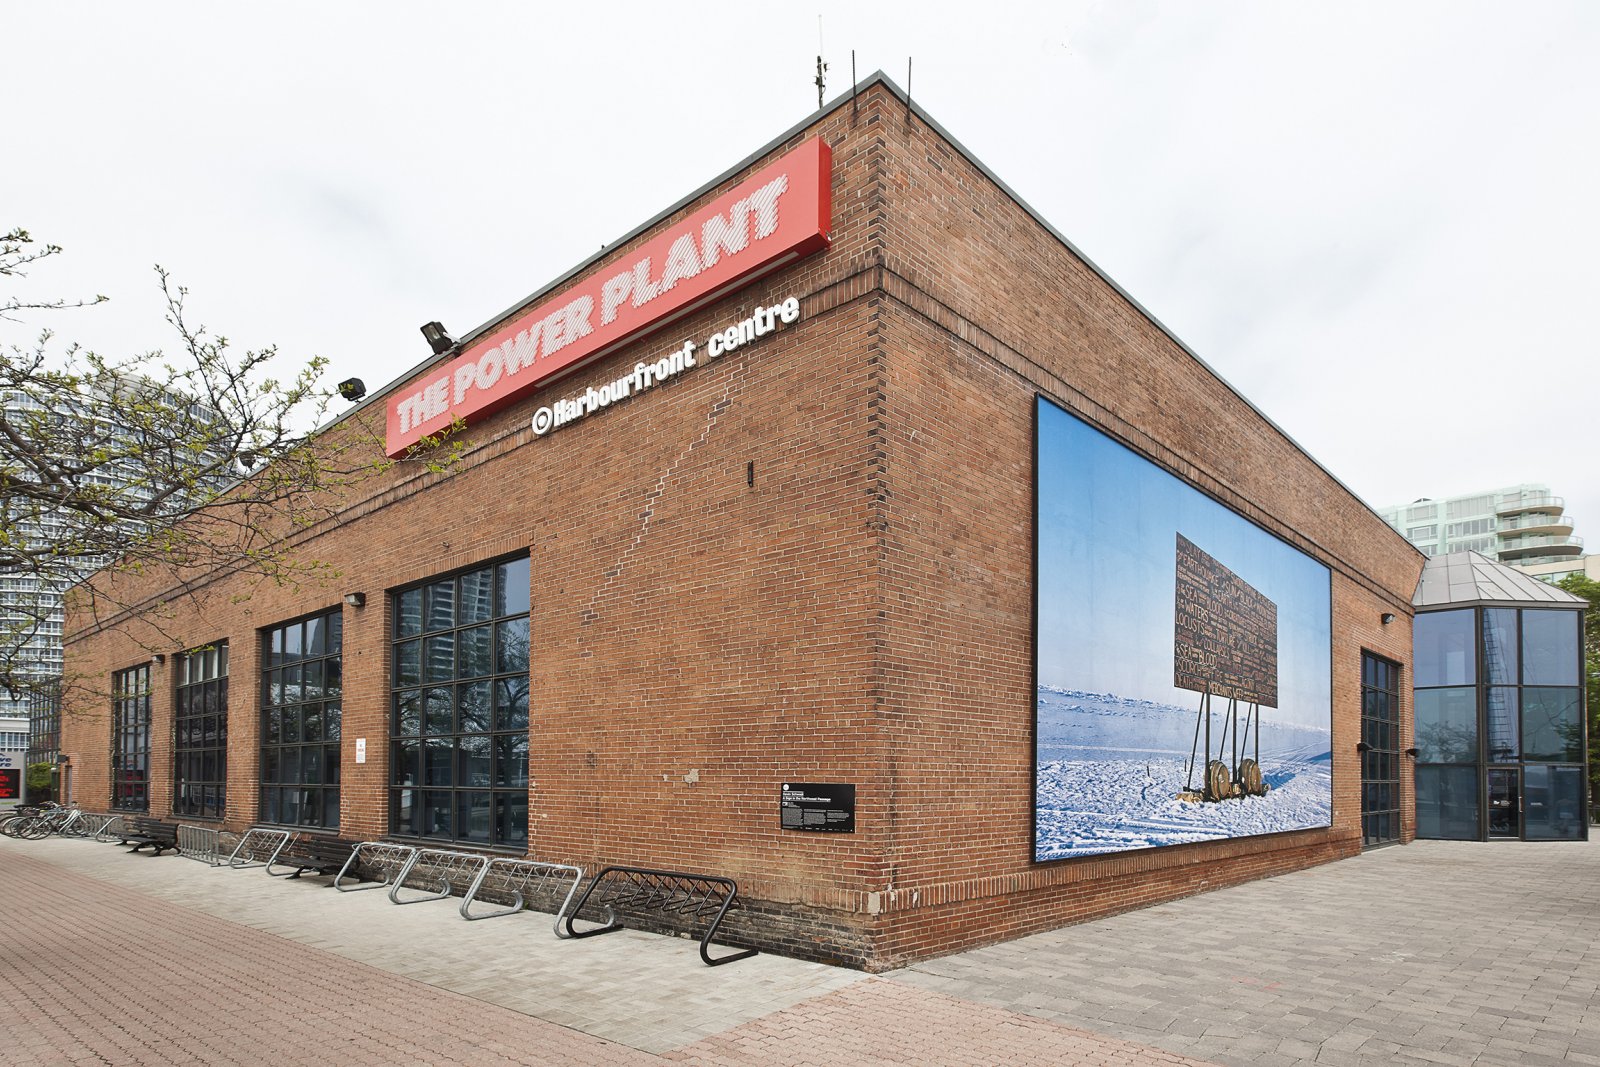 Kevin Schmidt, A Sign in the Northwest Passage (Billboard Mural), 2011, digital photo, dimensions variable. Installation view, The Power Plant, Toronto, 2011